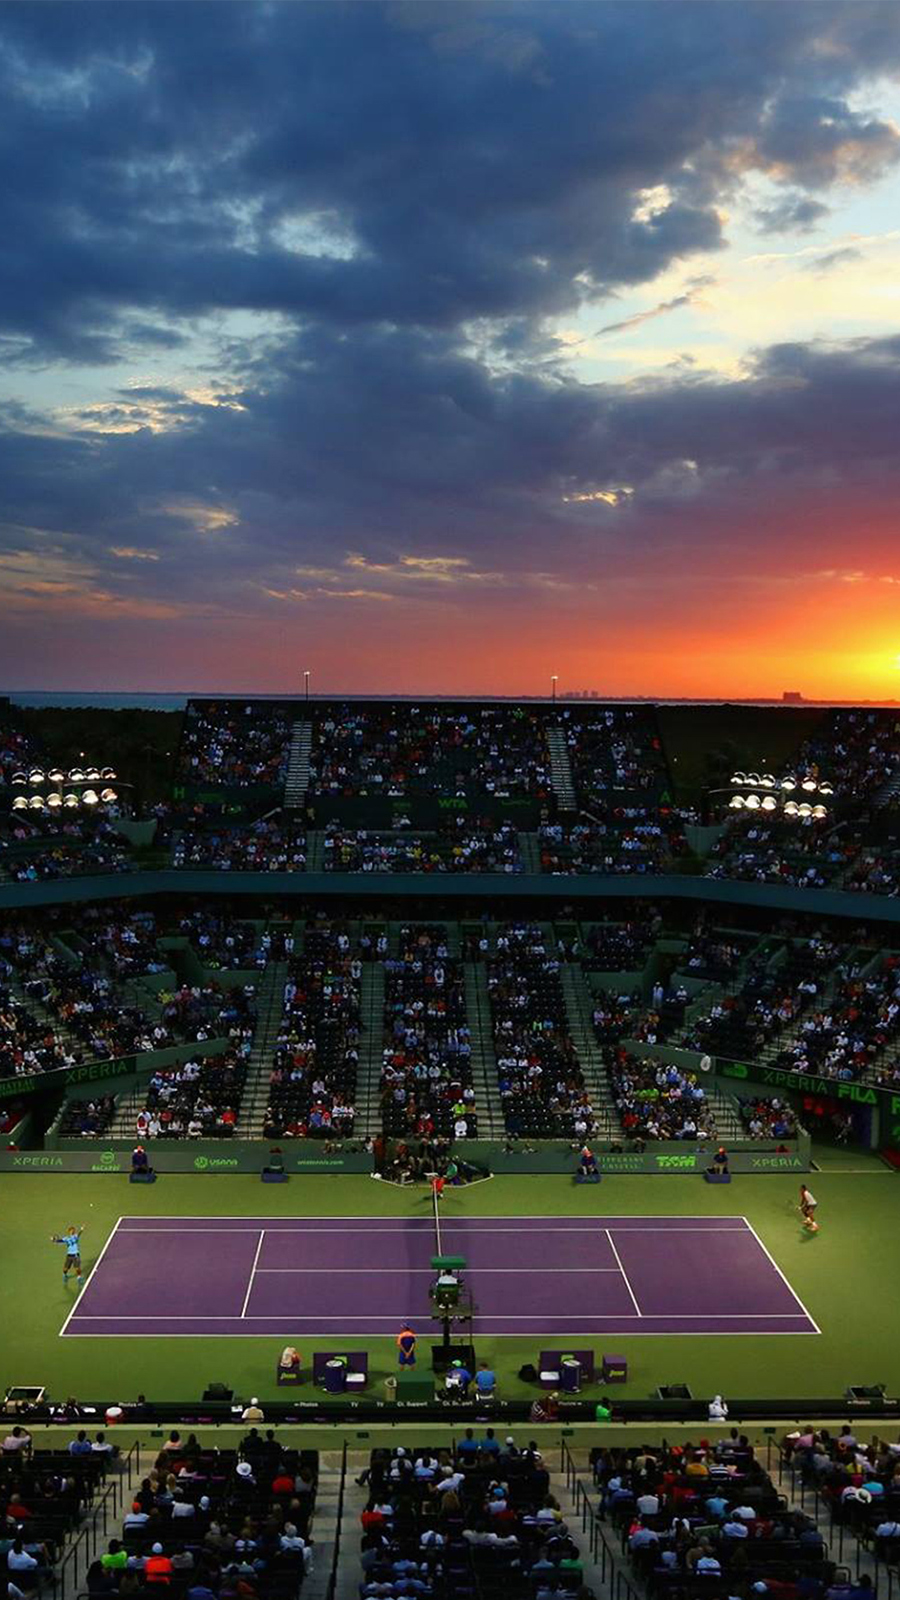 Tennis Court Miami Open Sunset Android Wallpaper